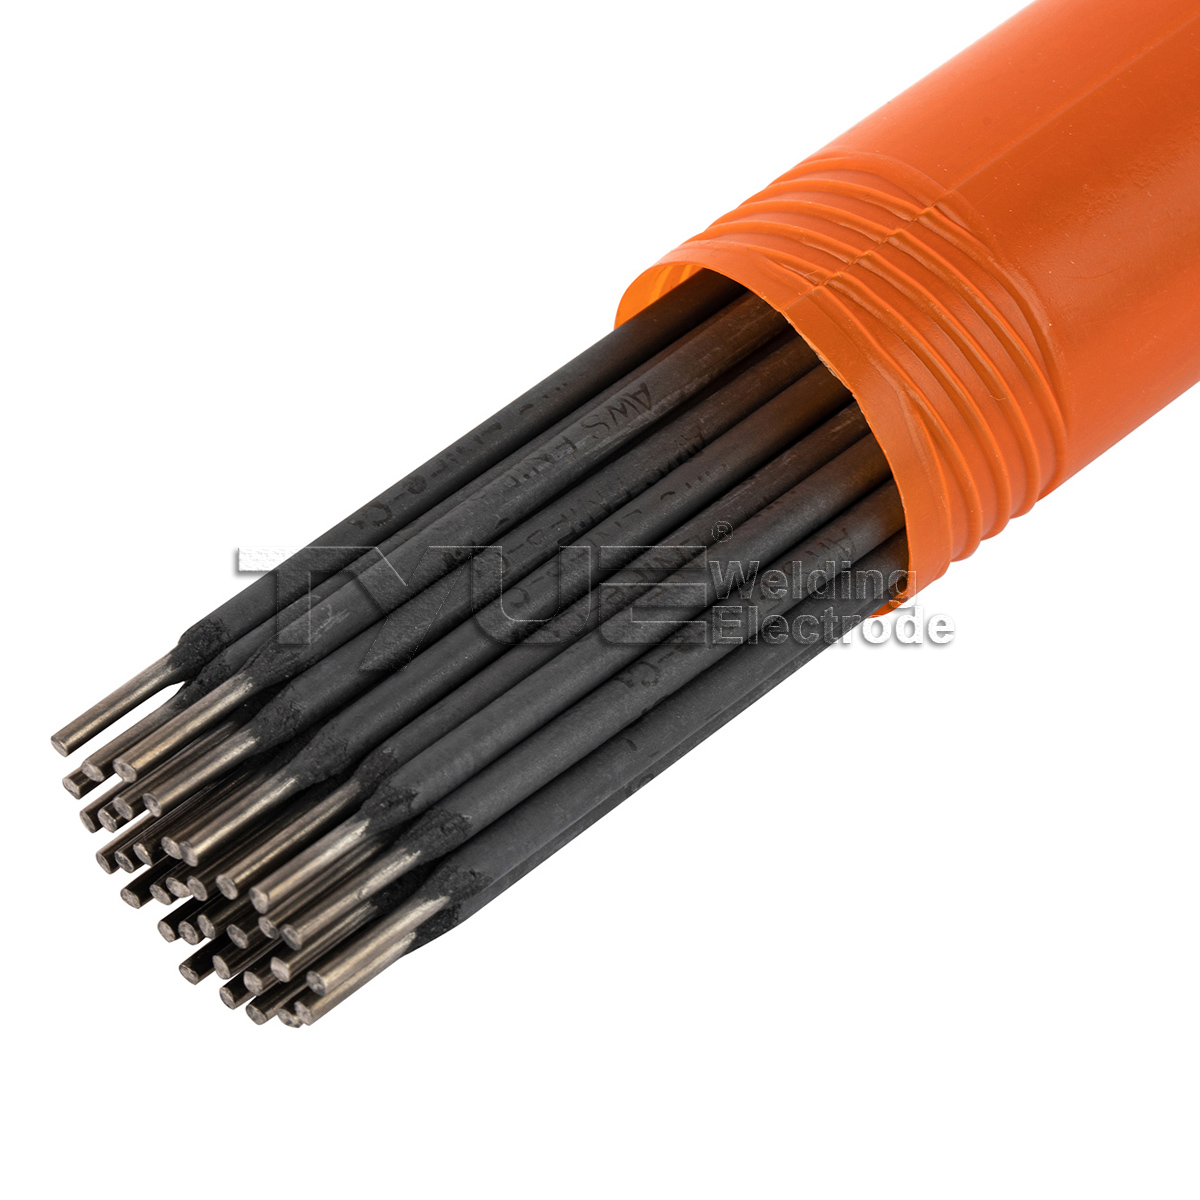 China AWS ENiFe-C1 (Z408) Pure Nickel Cast Iron Welding Electrodes